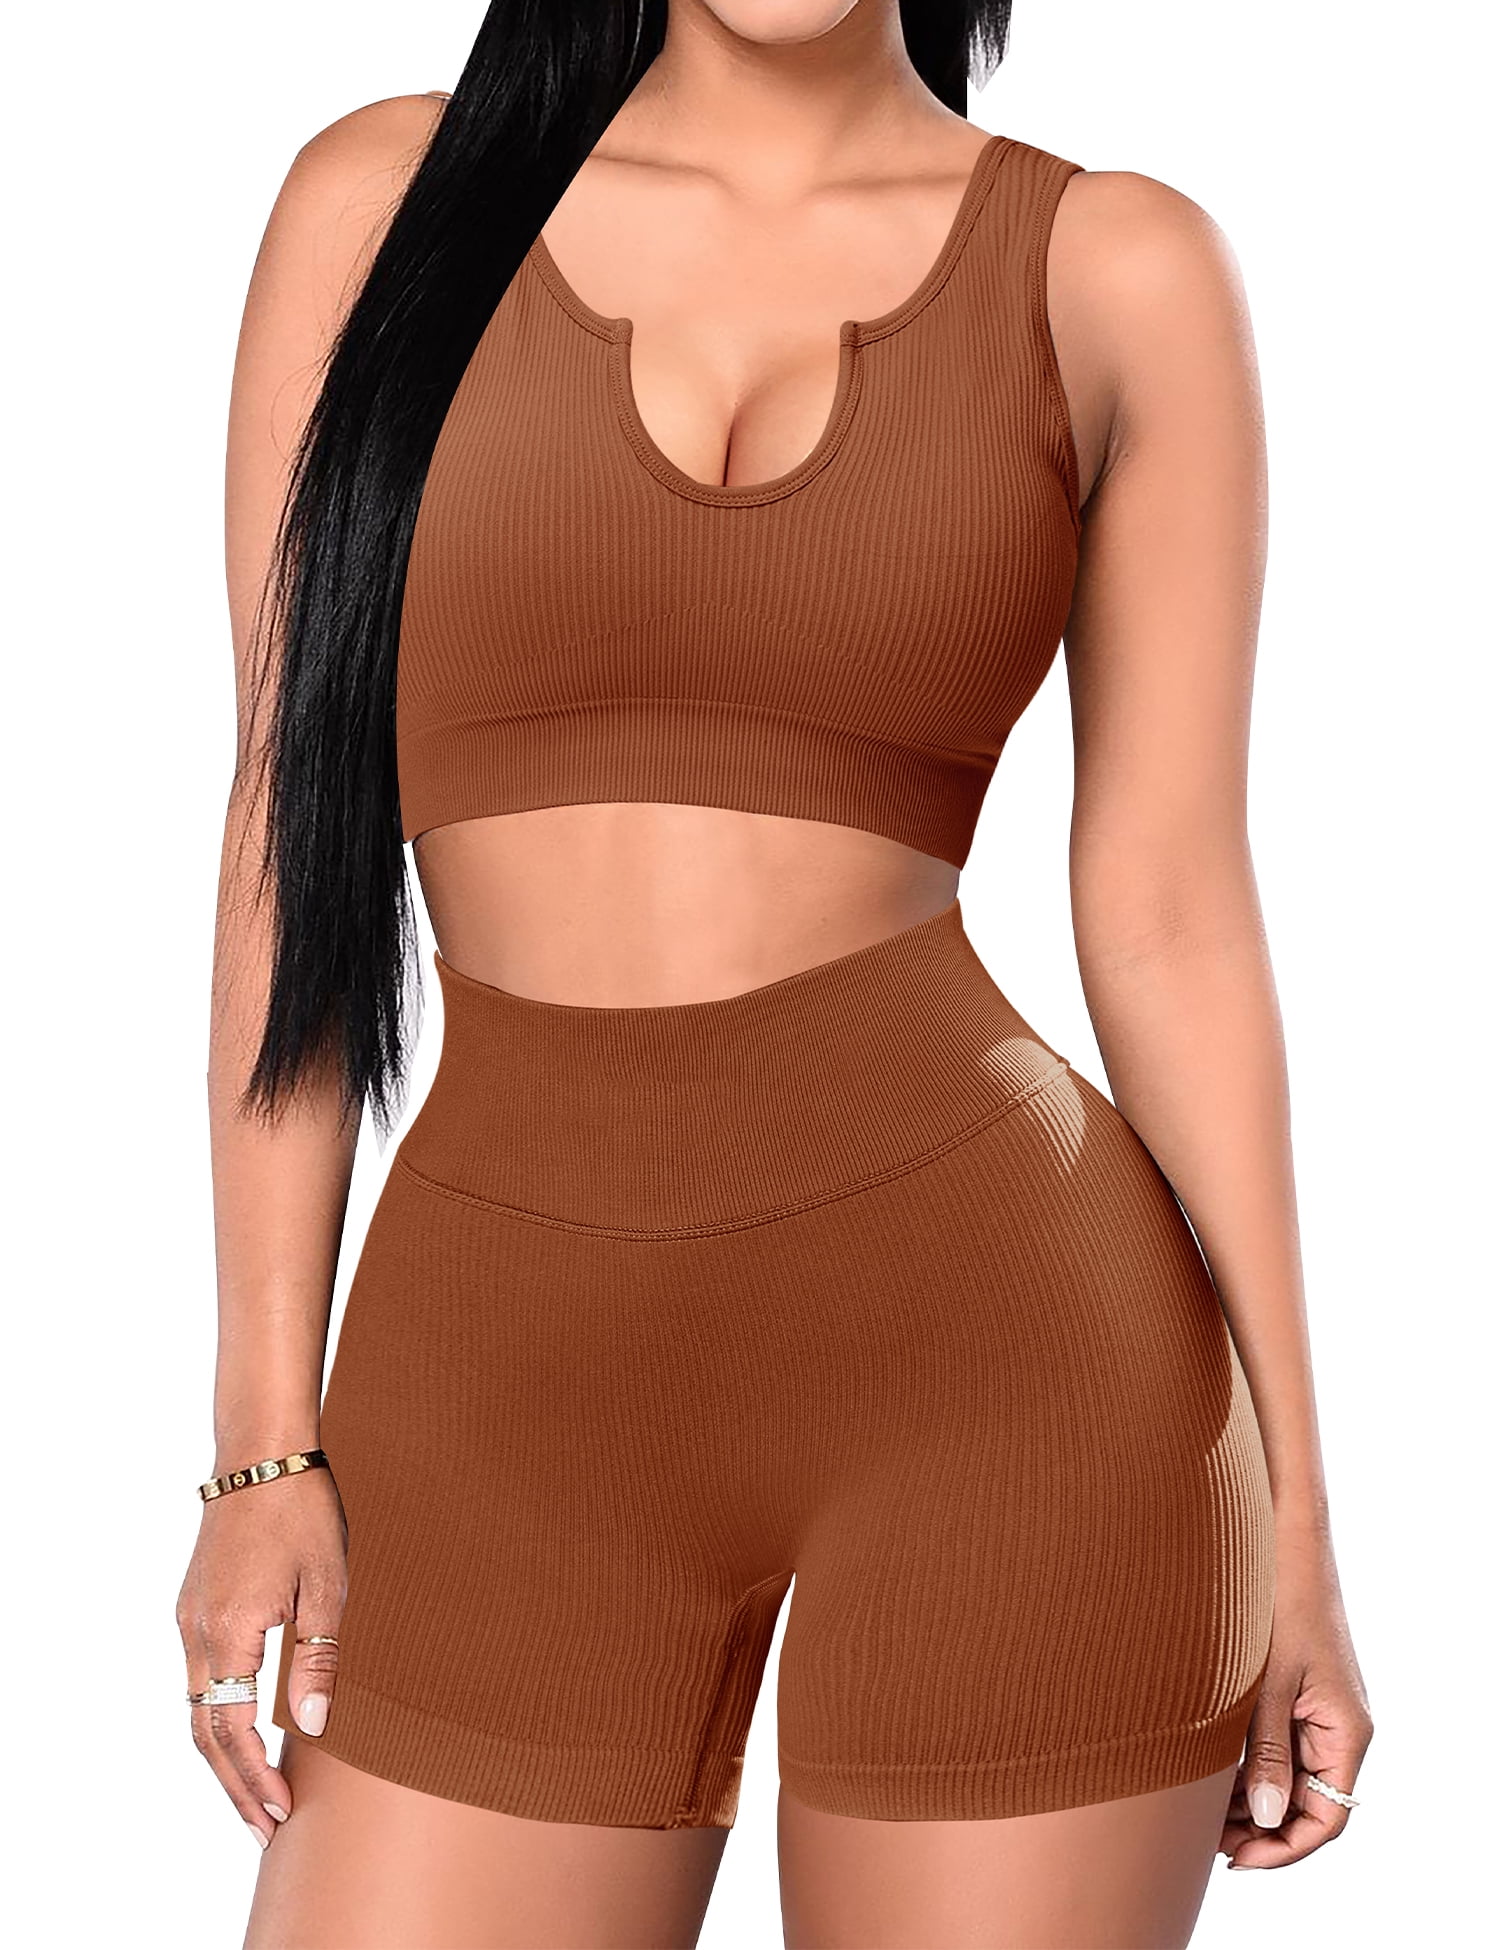  Brown 2 Piece Workout Set for Women Outfit Gym High Waist  Leggings with Padded Push Up Sport Bra M : Sports & Outdoors